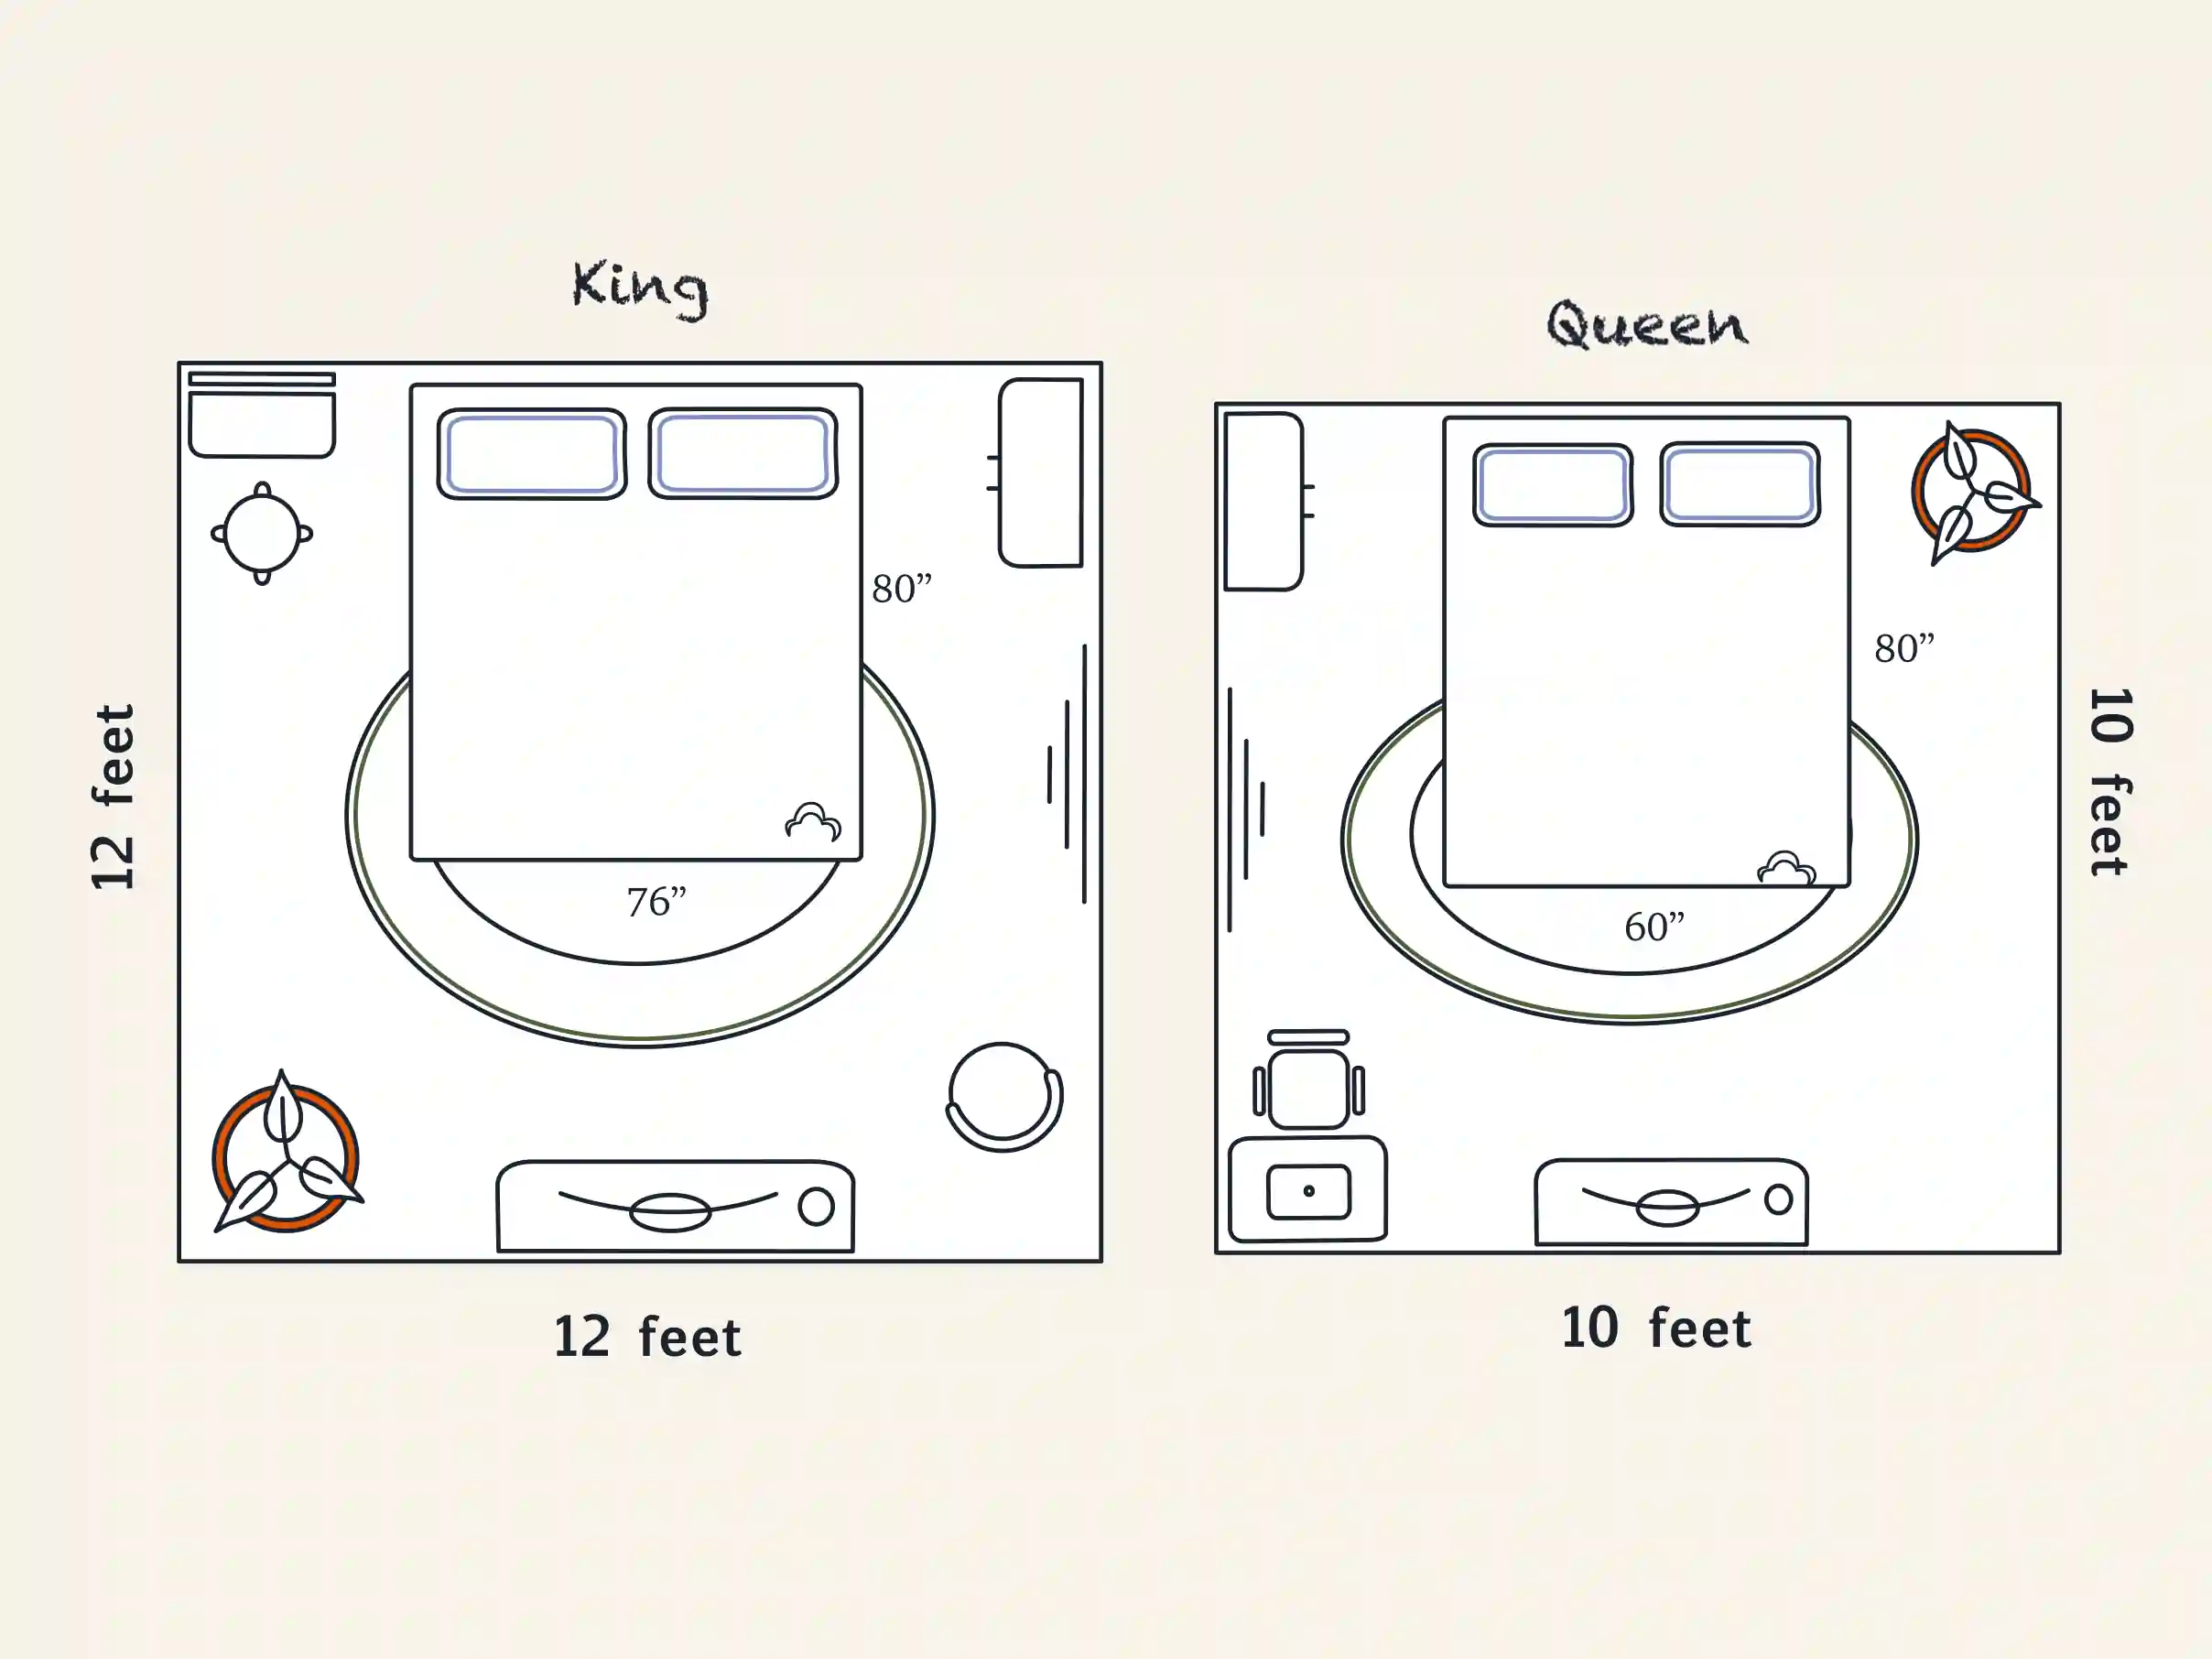 King Vs. Queen Size Bed - What's the Difference